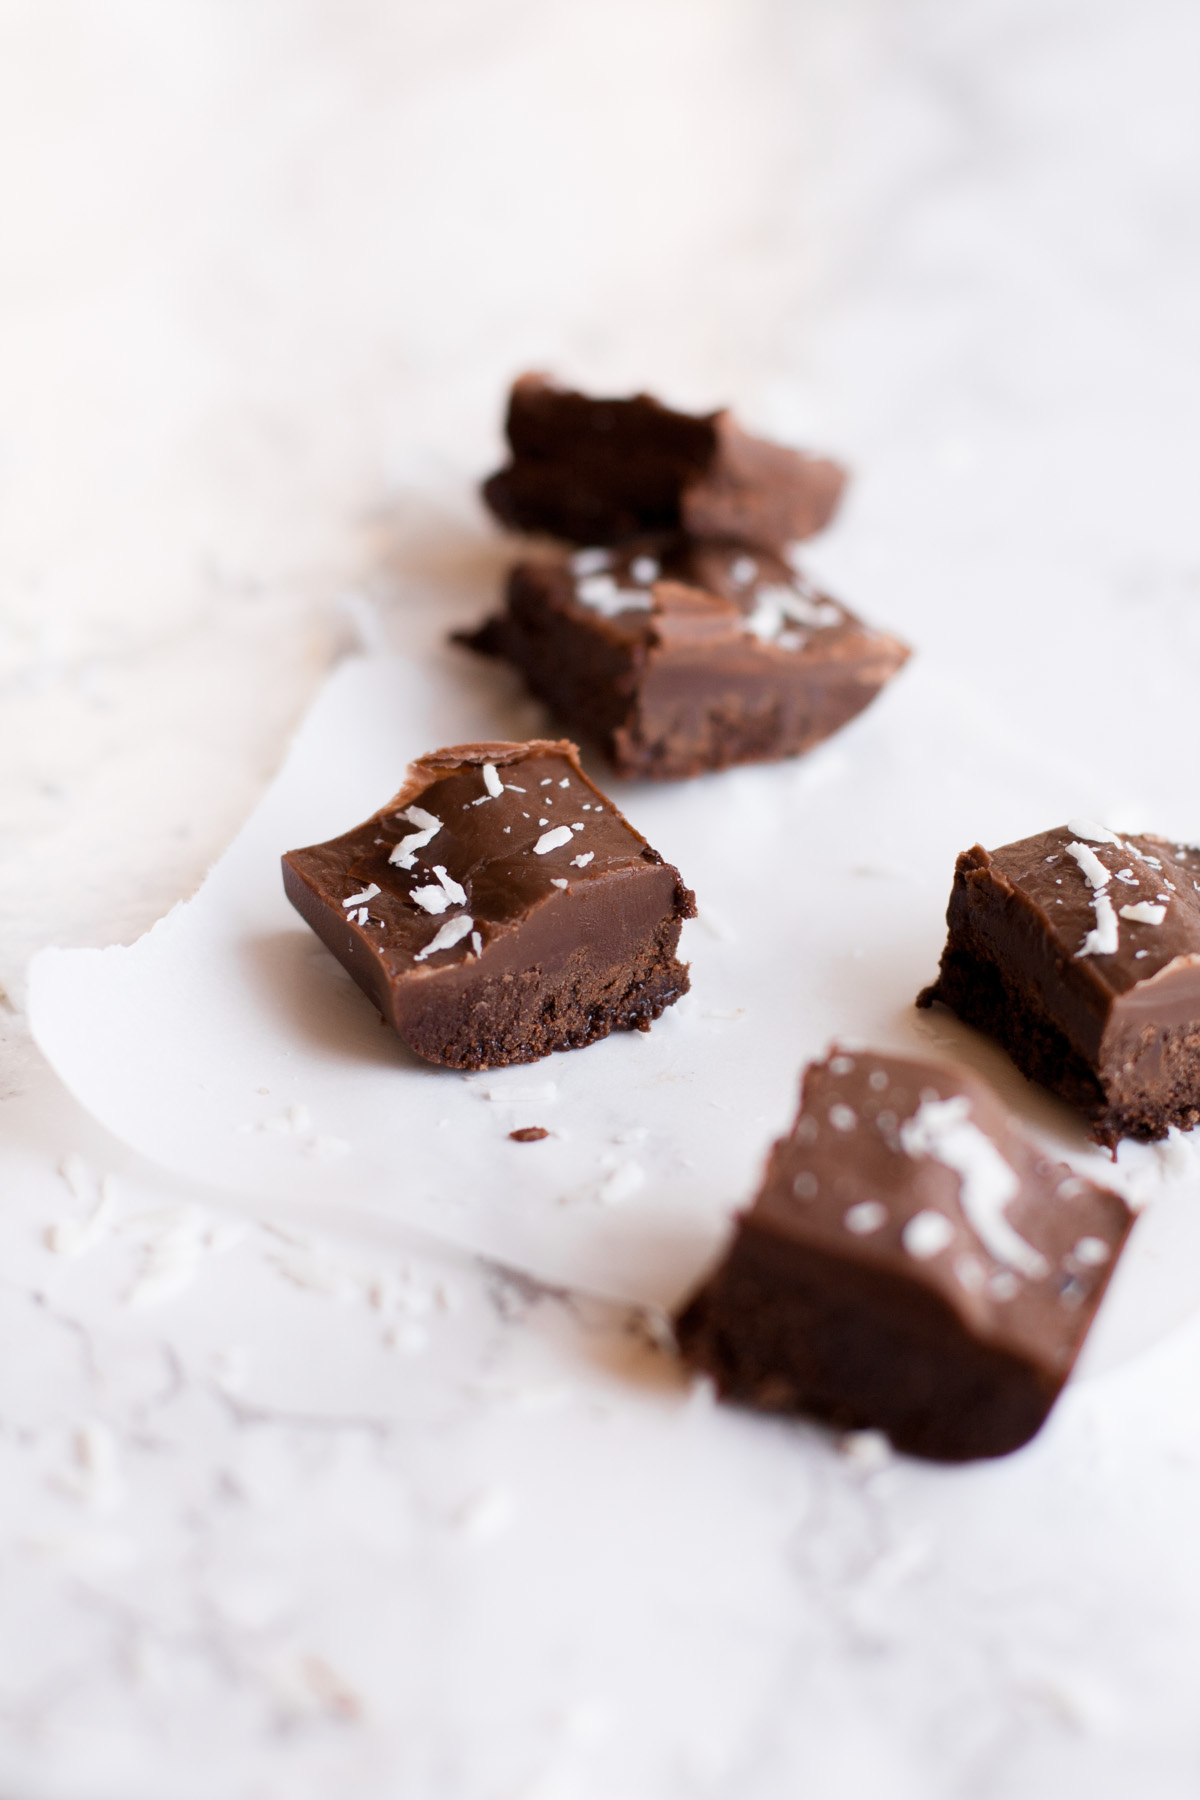 Dark Chocolate Coconut Oil Fudge; Top 7 Chocolate Fudge Recipes for Valentine's Day compiled by Jane Bonacci, The Heritage Cook 2019